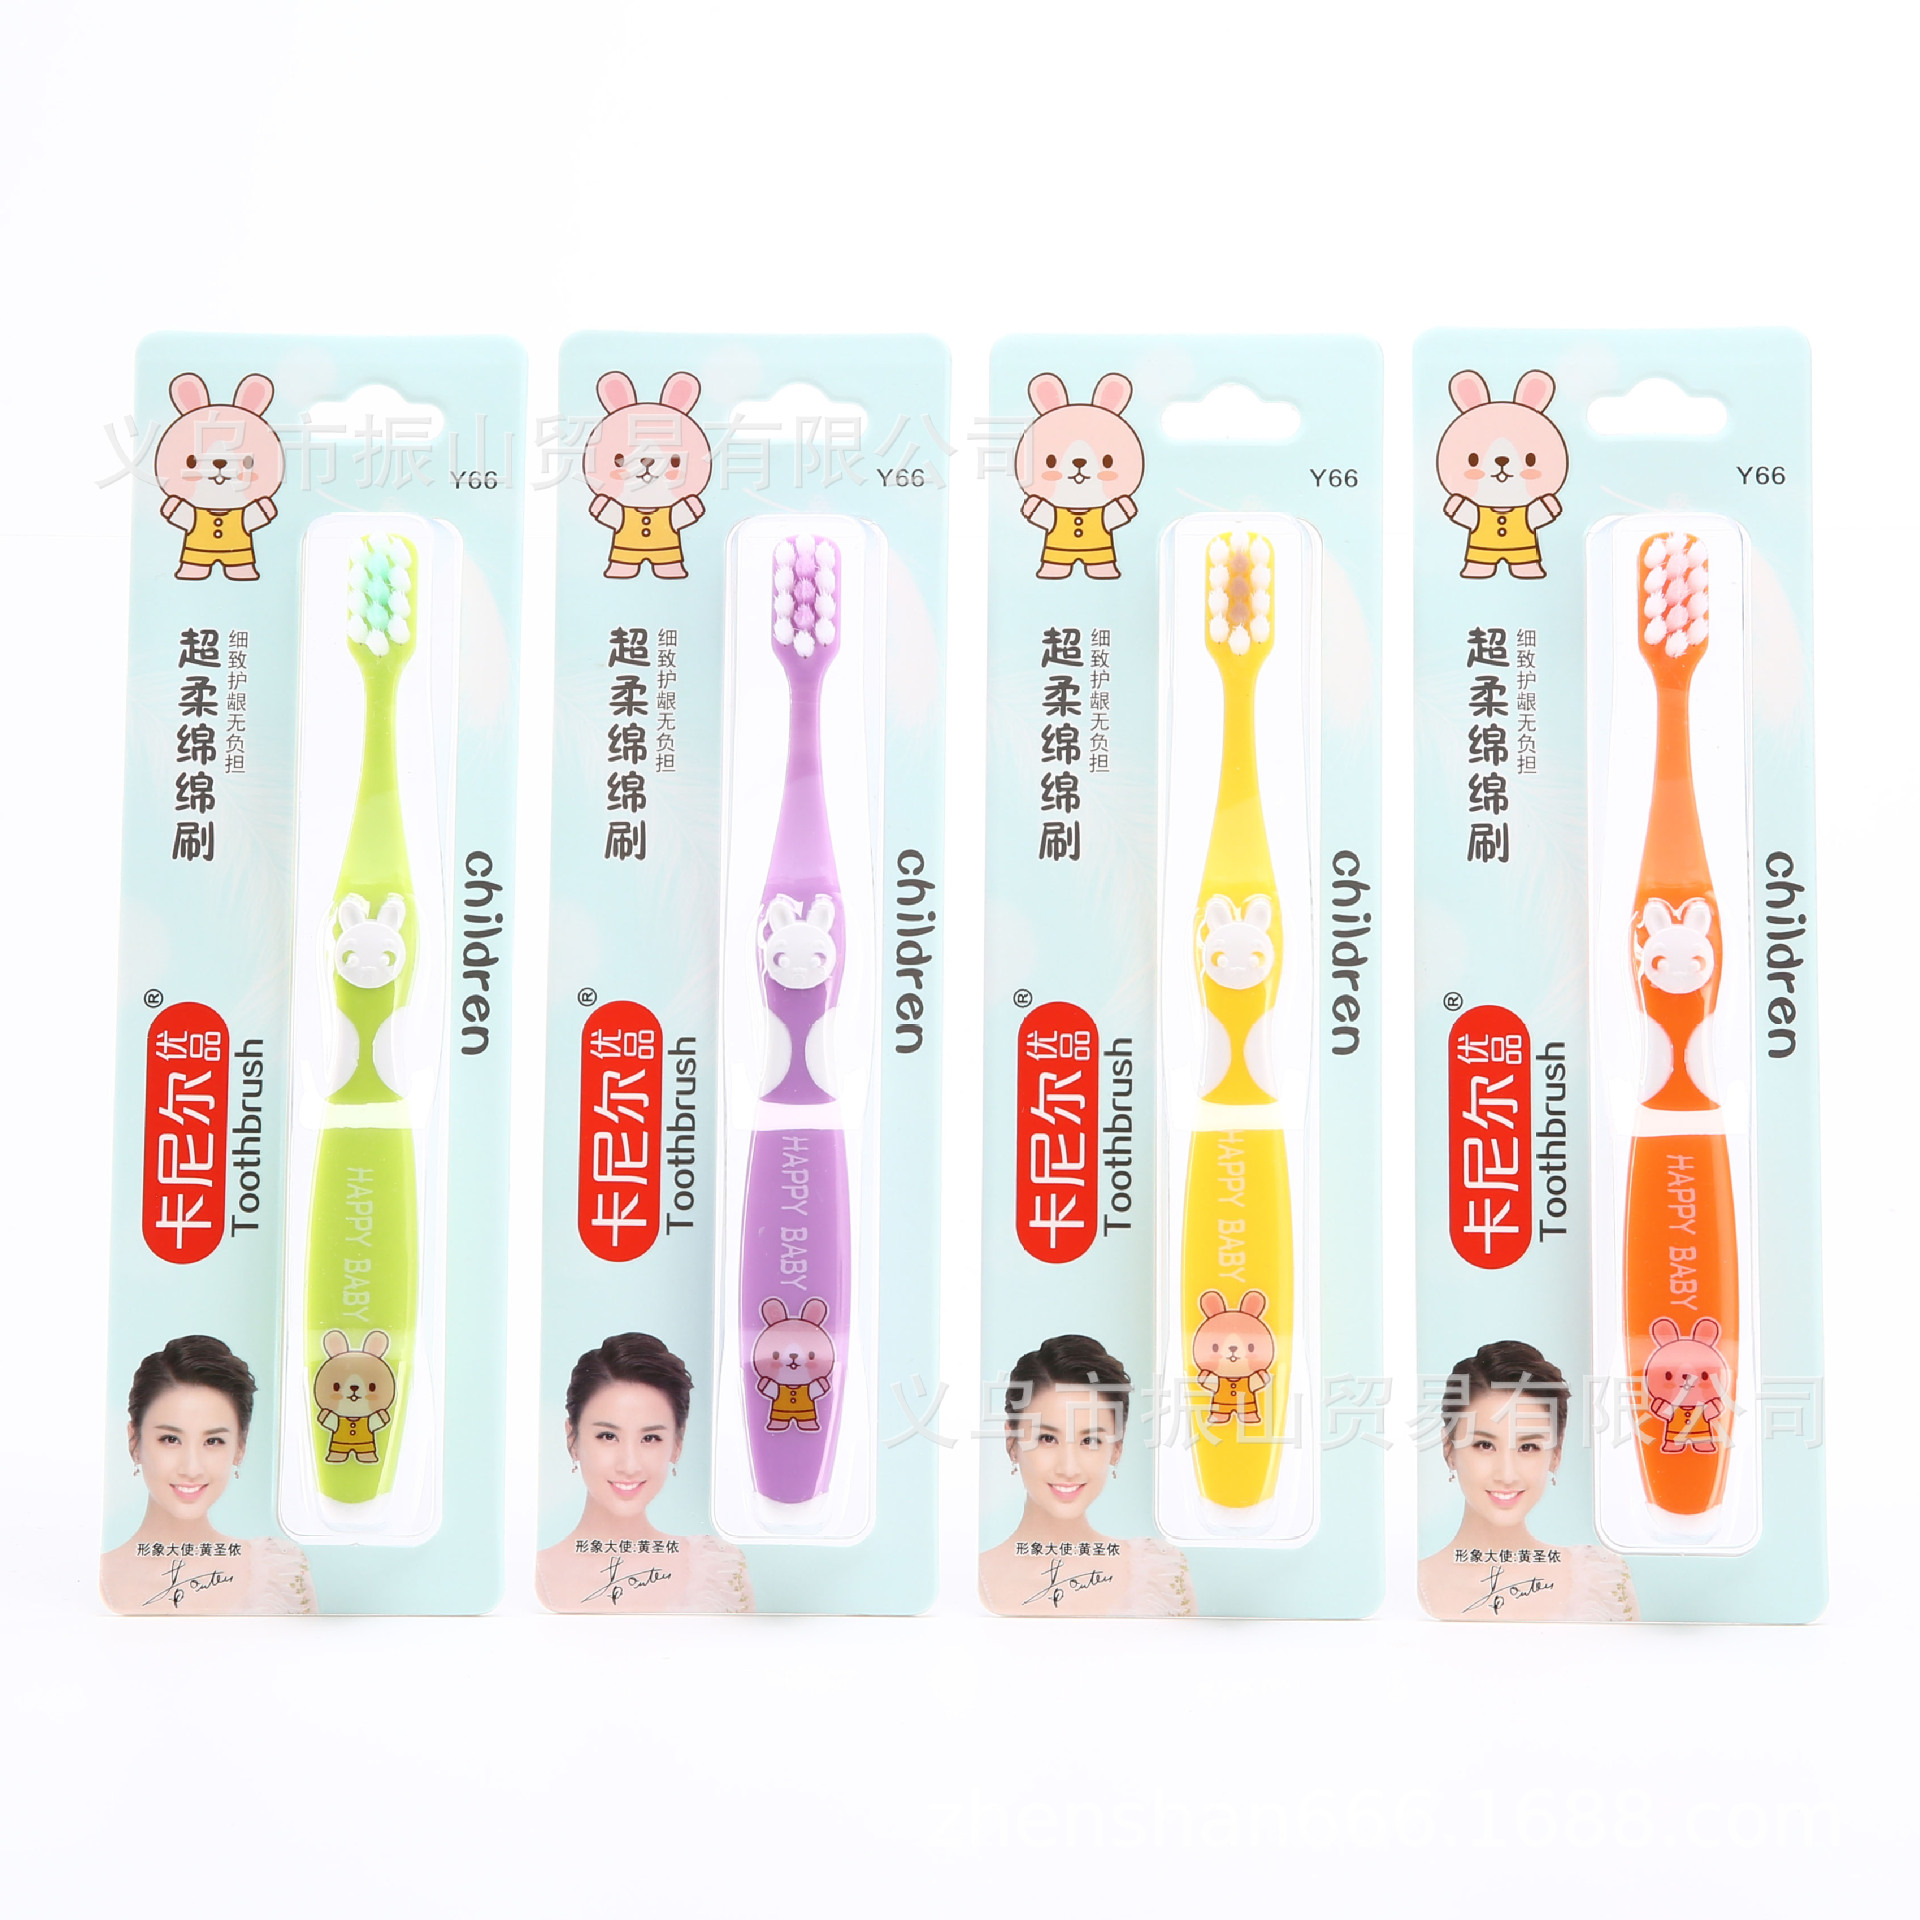 kanille y66 double-sided paper card scientific age over 6 years old cotton brush meticulous gum care children‘s toothbrush